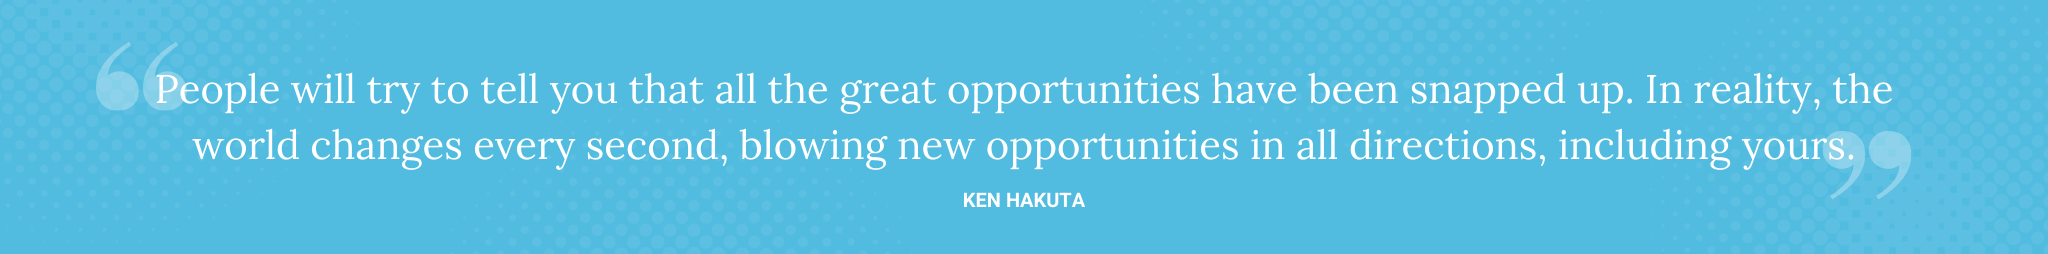 Ken Hakuta Quote for 50 Customer Service Stats Quotes and Facts - Brittany Hodak